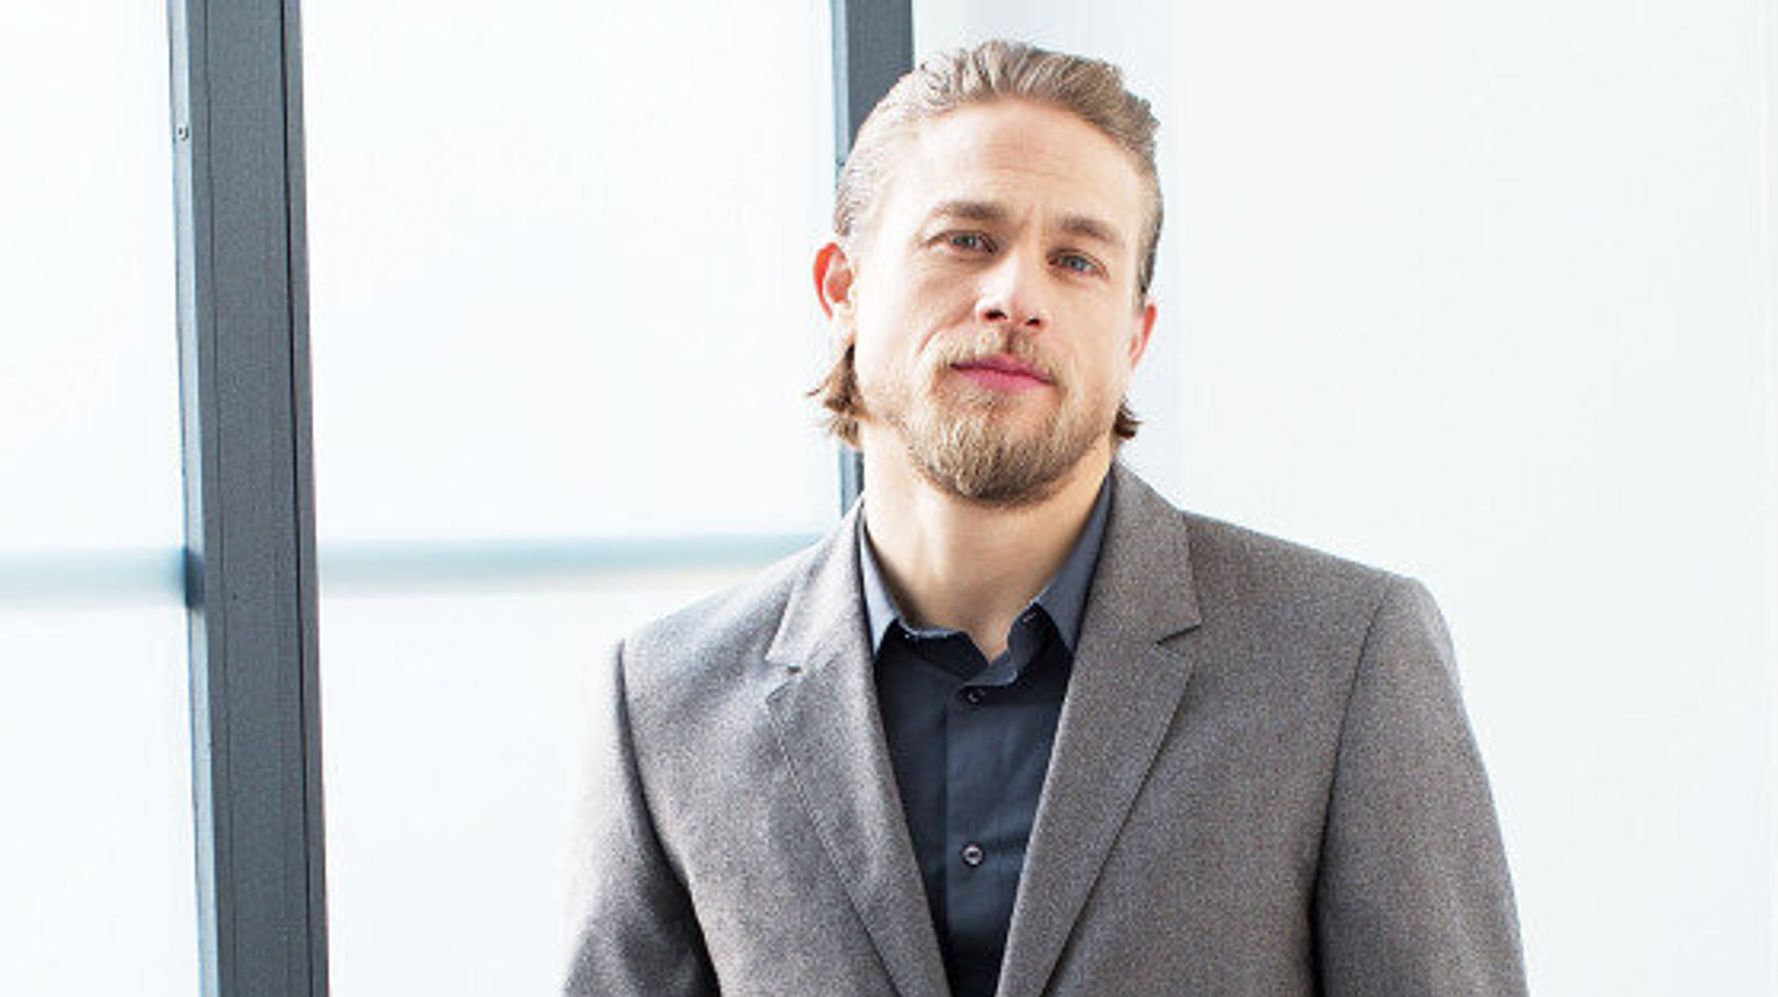 charlie hunnam wearing a ponytail